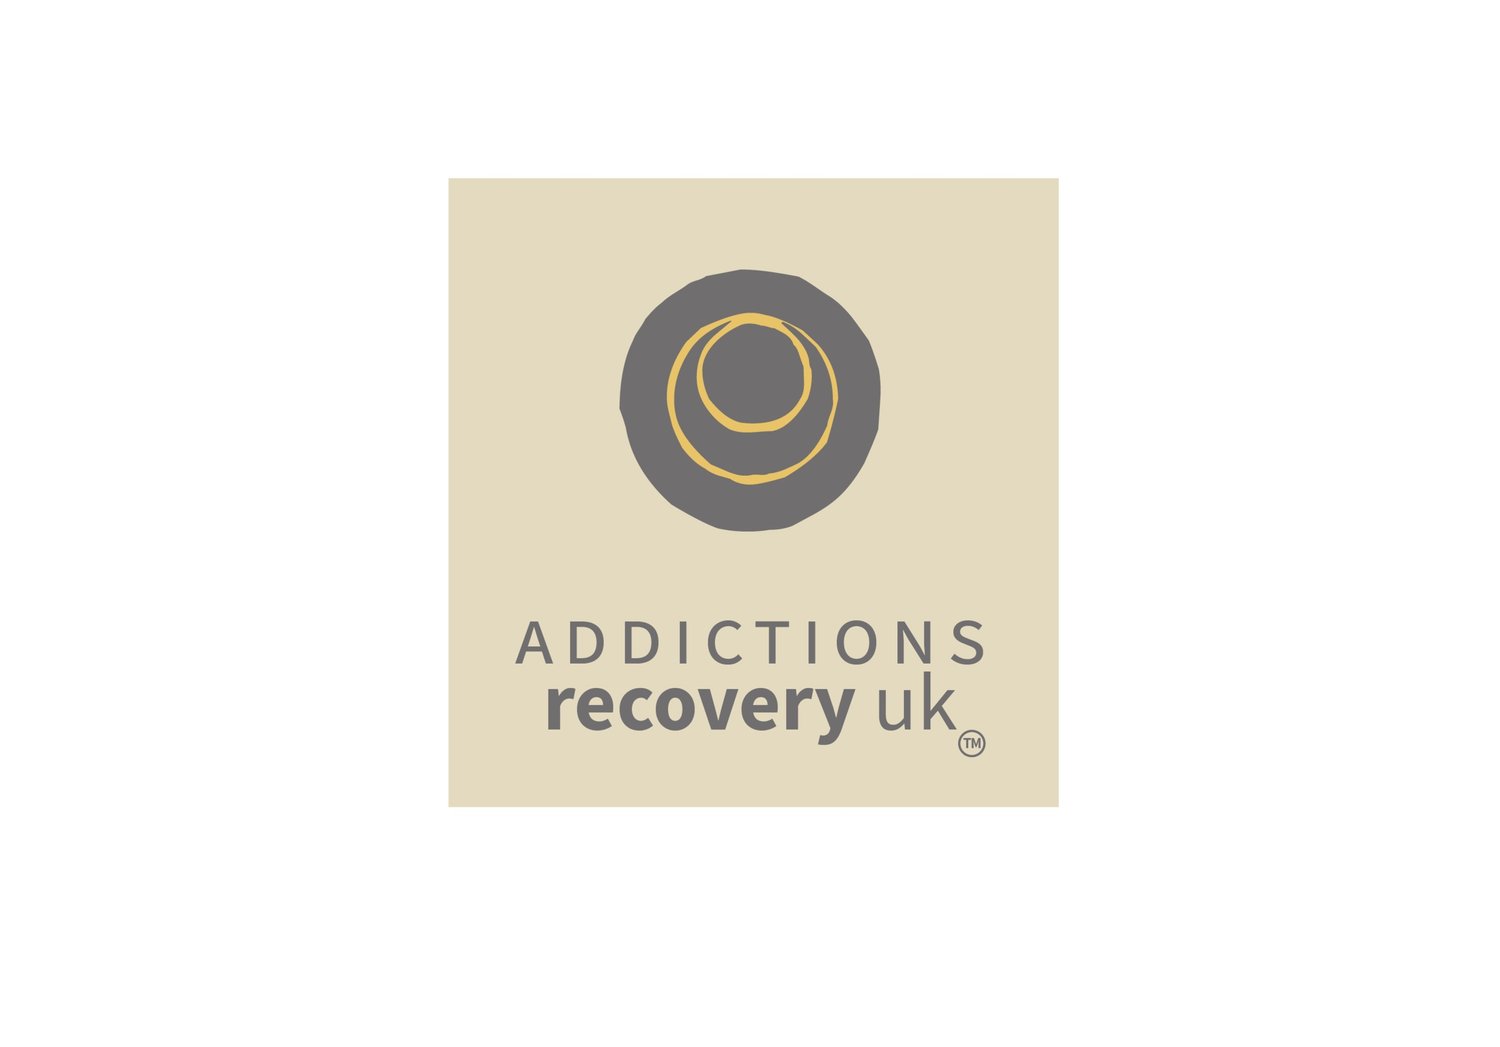 Professional addictions psychotherapy in the heart of England